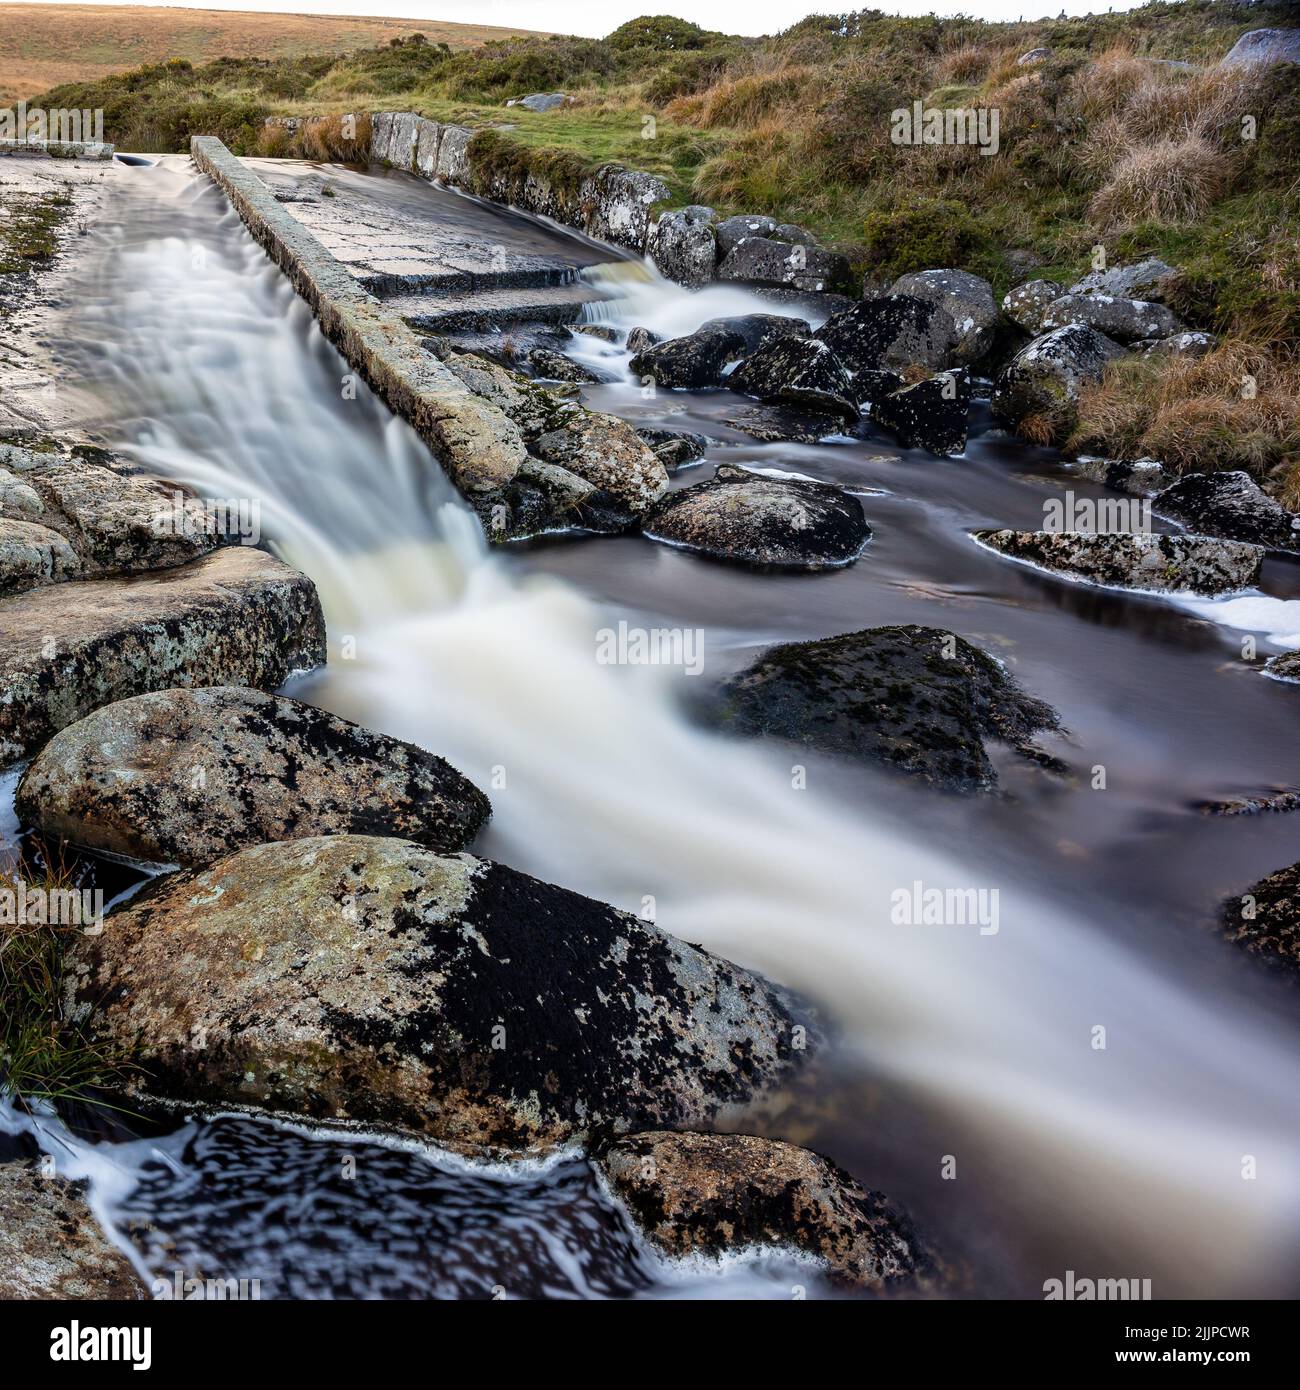 A mesmerizing scene of flowing majestic water with rocks into the Devonport Leat with trees Stock Photo